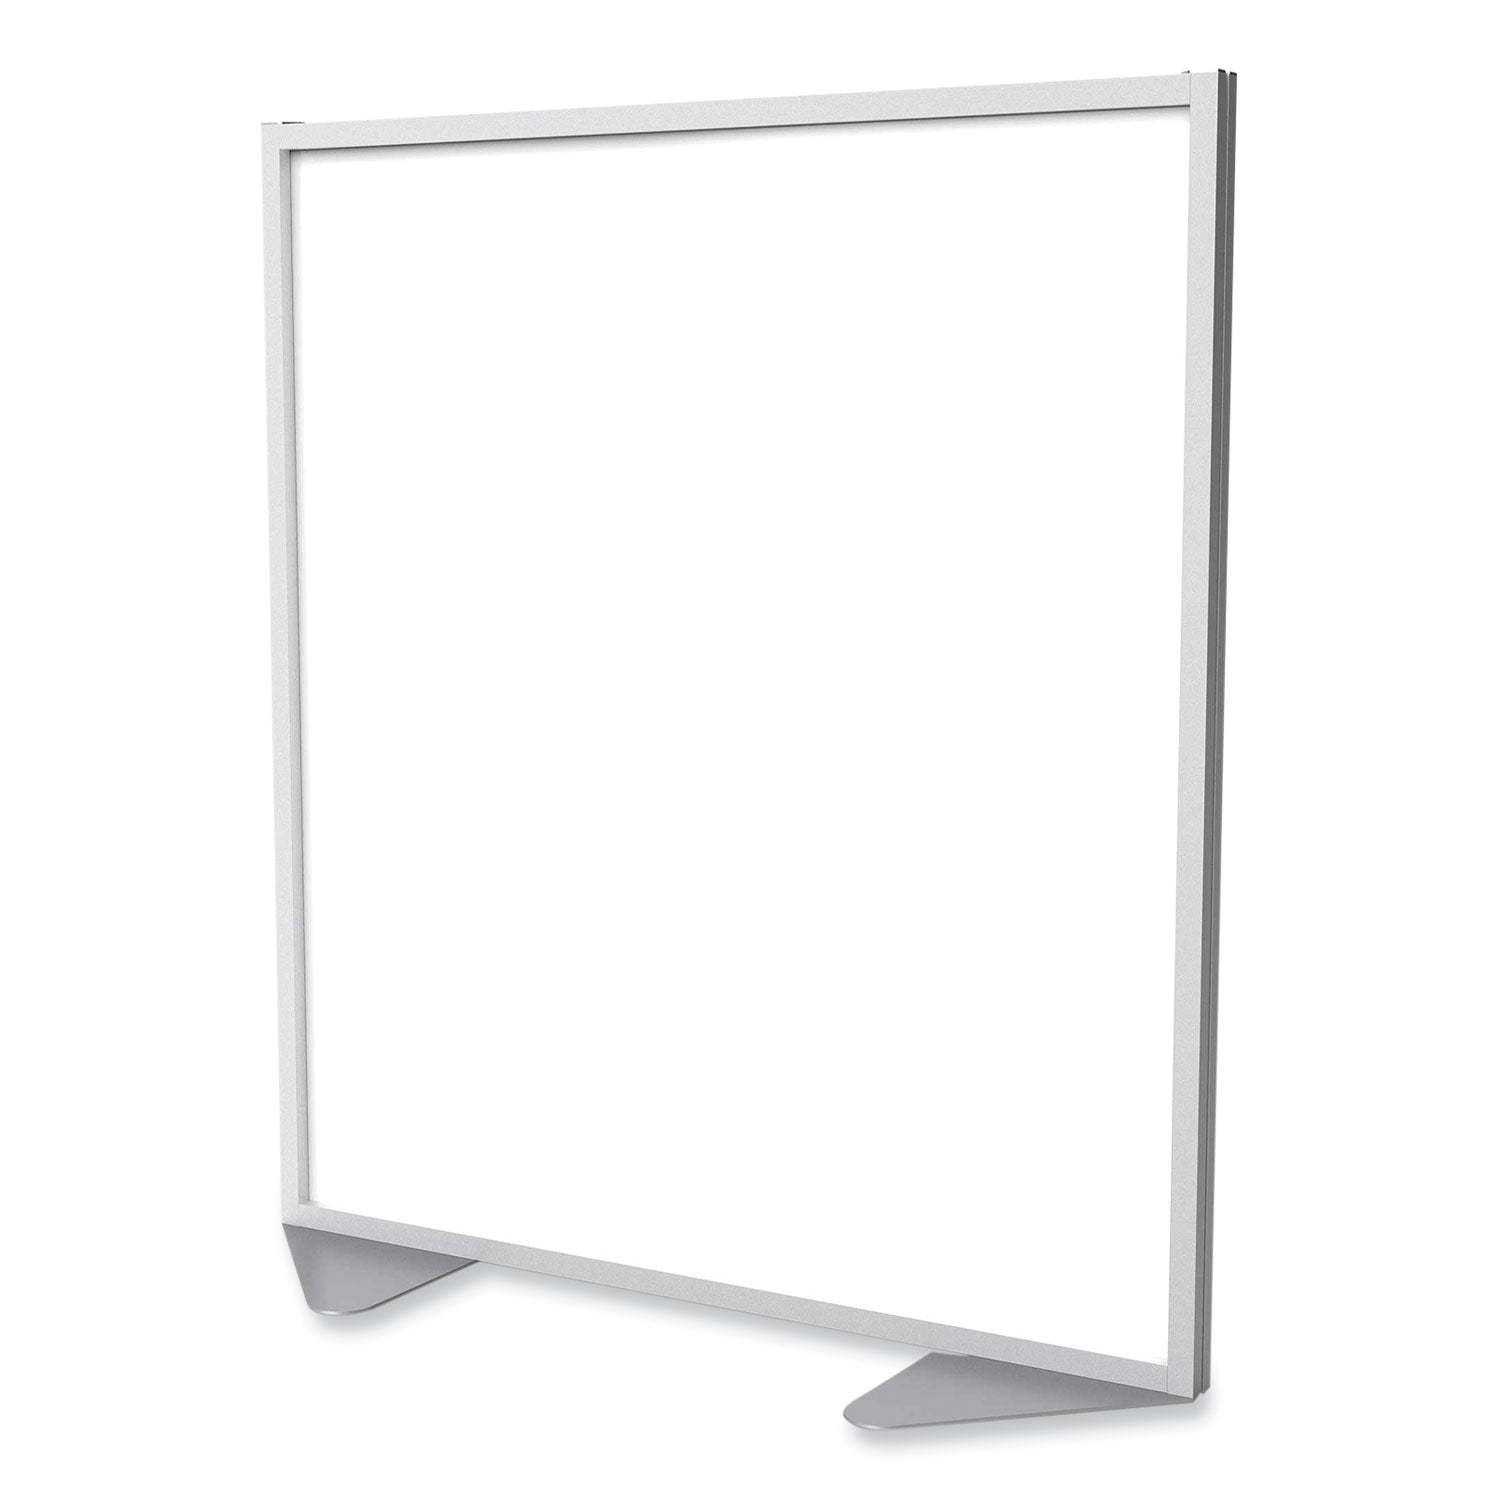 floor-partition-with-aluminum-frame-4806-x-204-x-5386-white-ships-in-7-10-business-days_ghemp544820 - 3